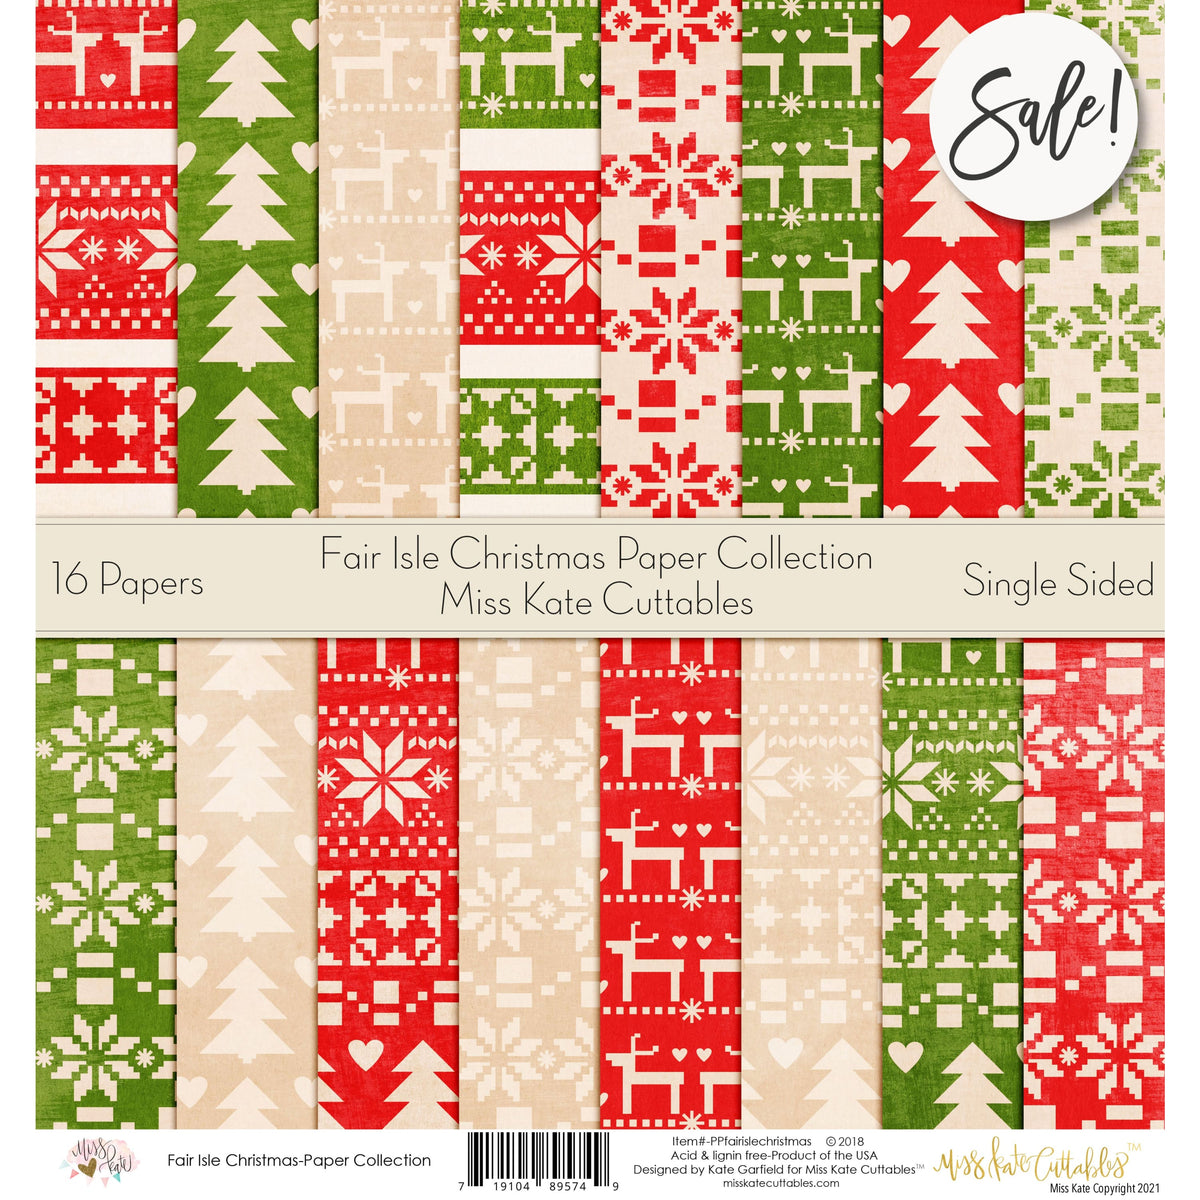 Cold Days - Christmas Cardstock – MISS KATE